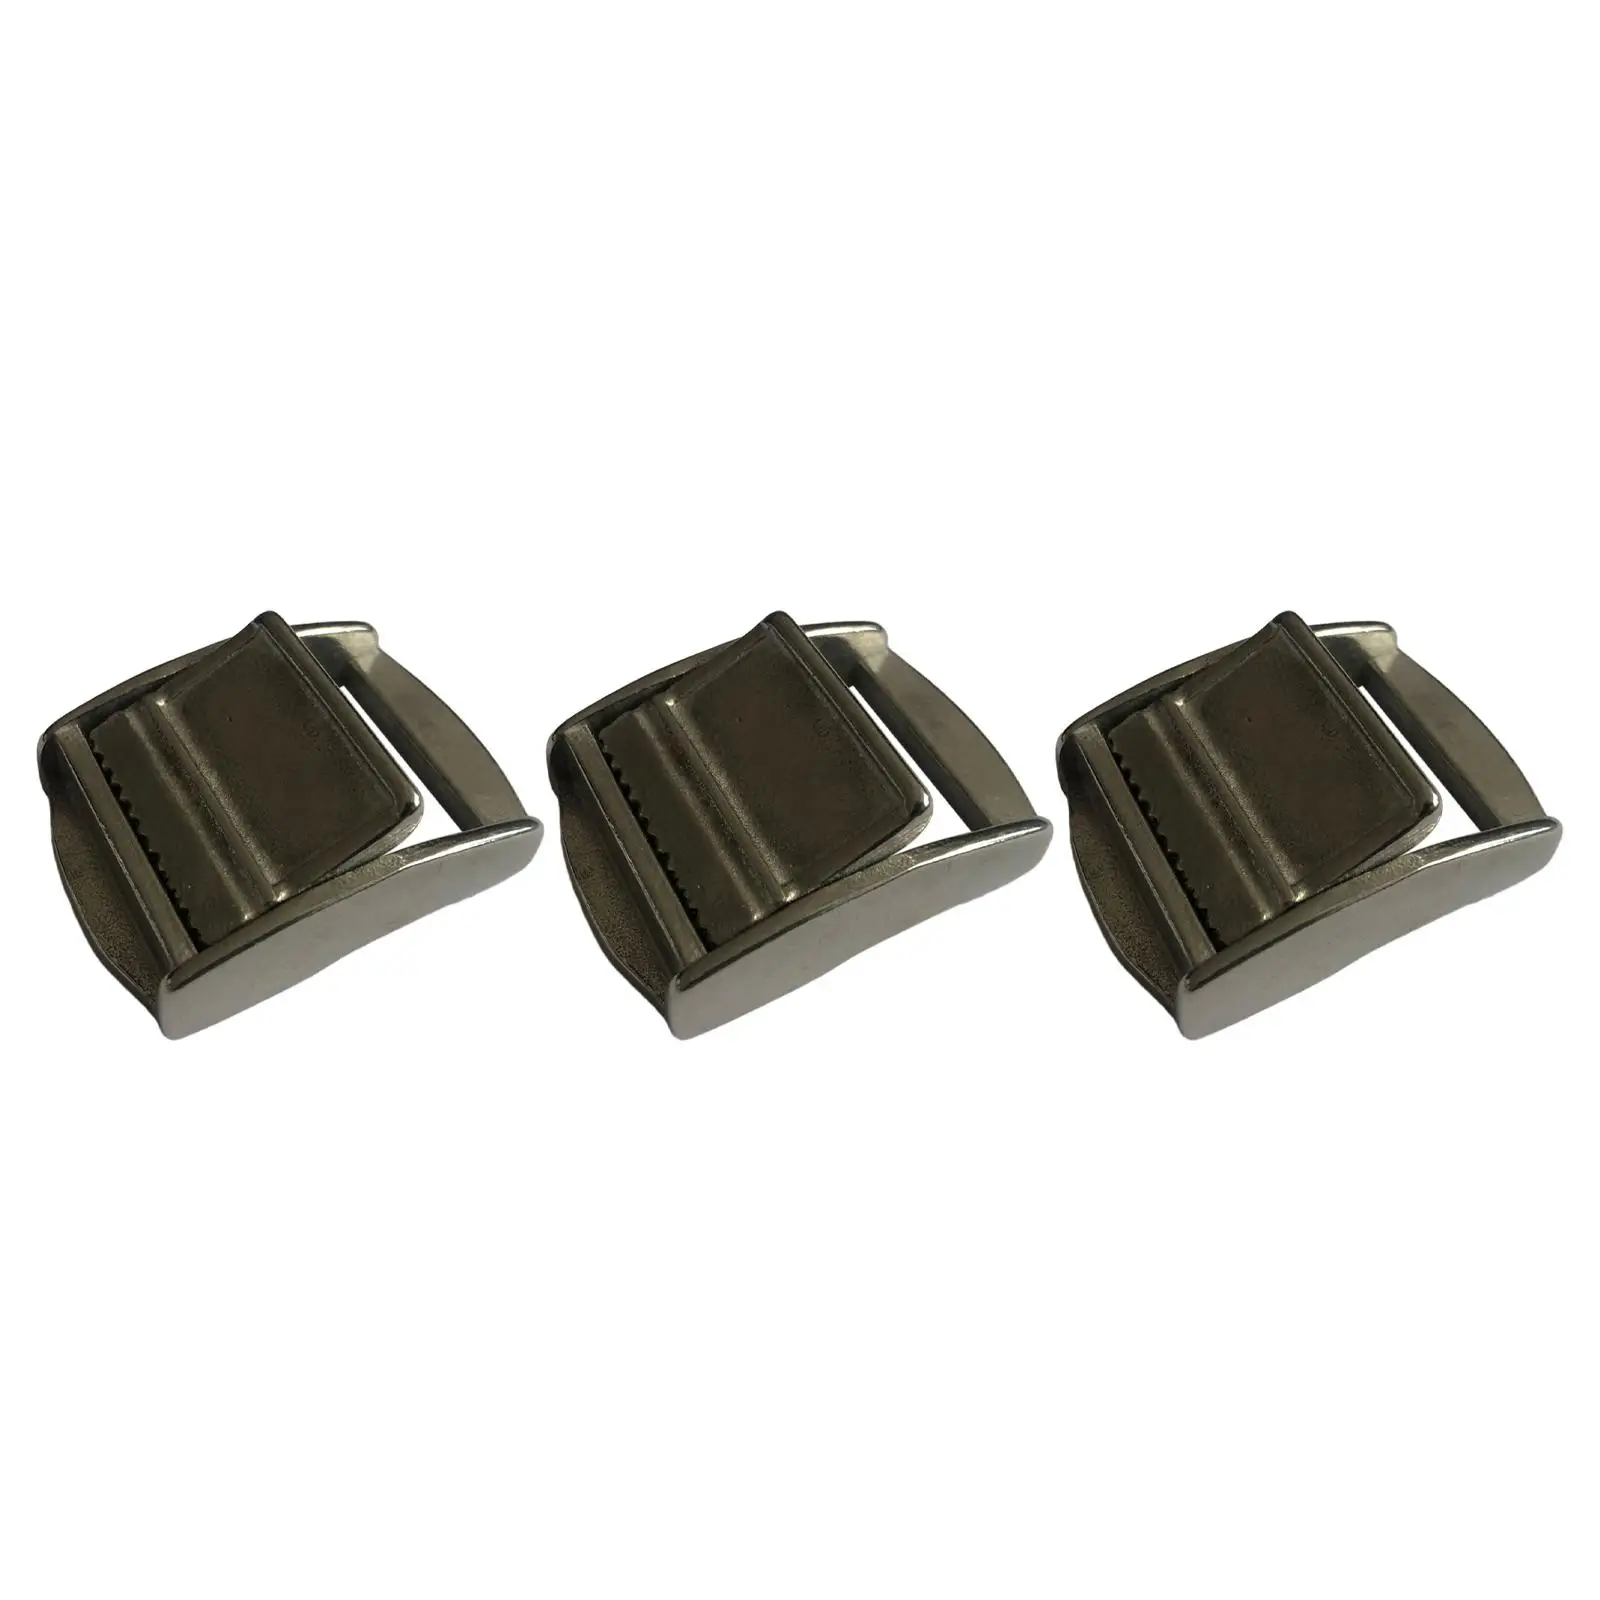 3pcs Stainless Steel Belt Cam Buckles Ending Clips Car Motorcycle Towing